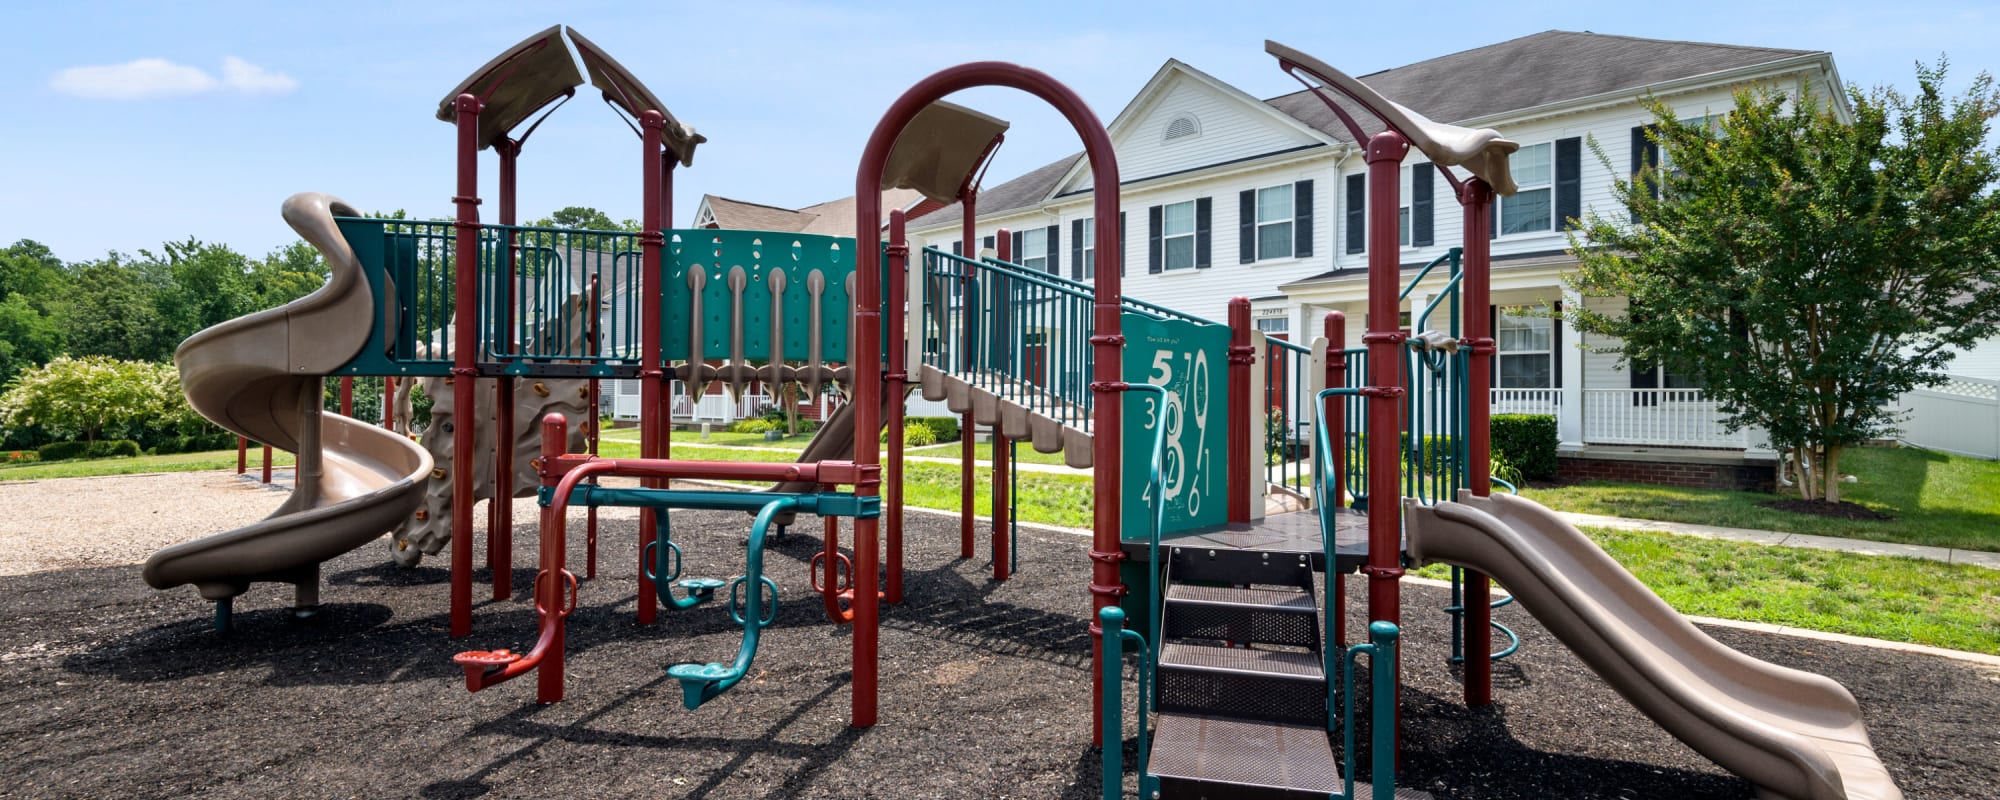 A playground at Lovell Cove in Patuxent River, Maryland